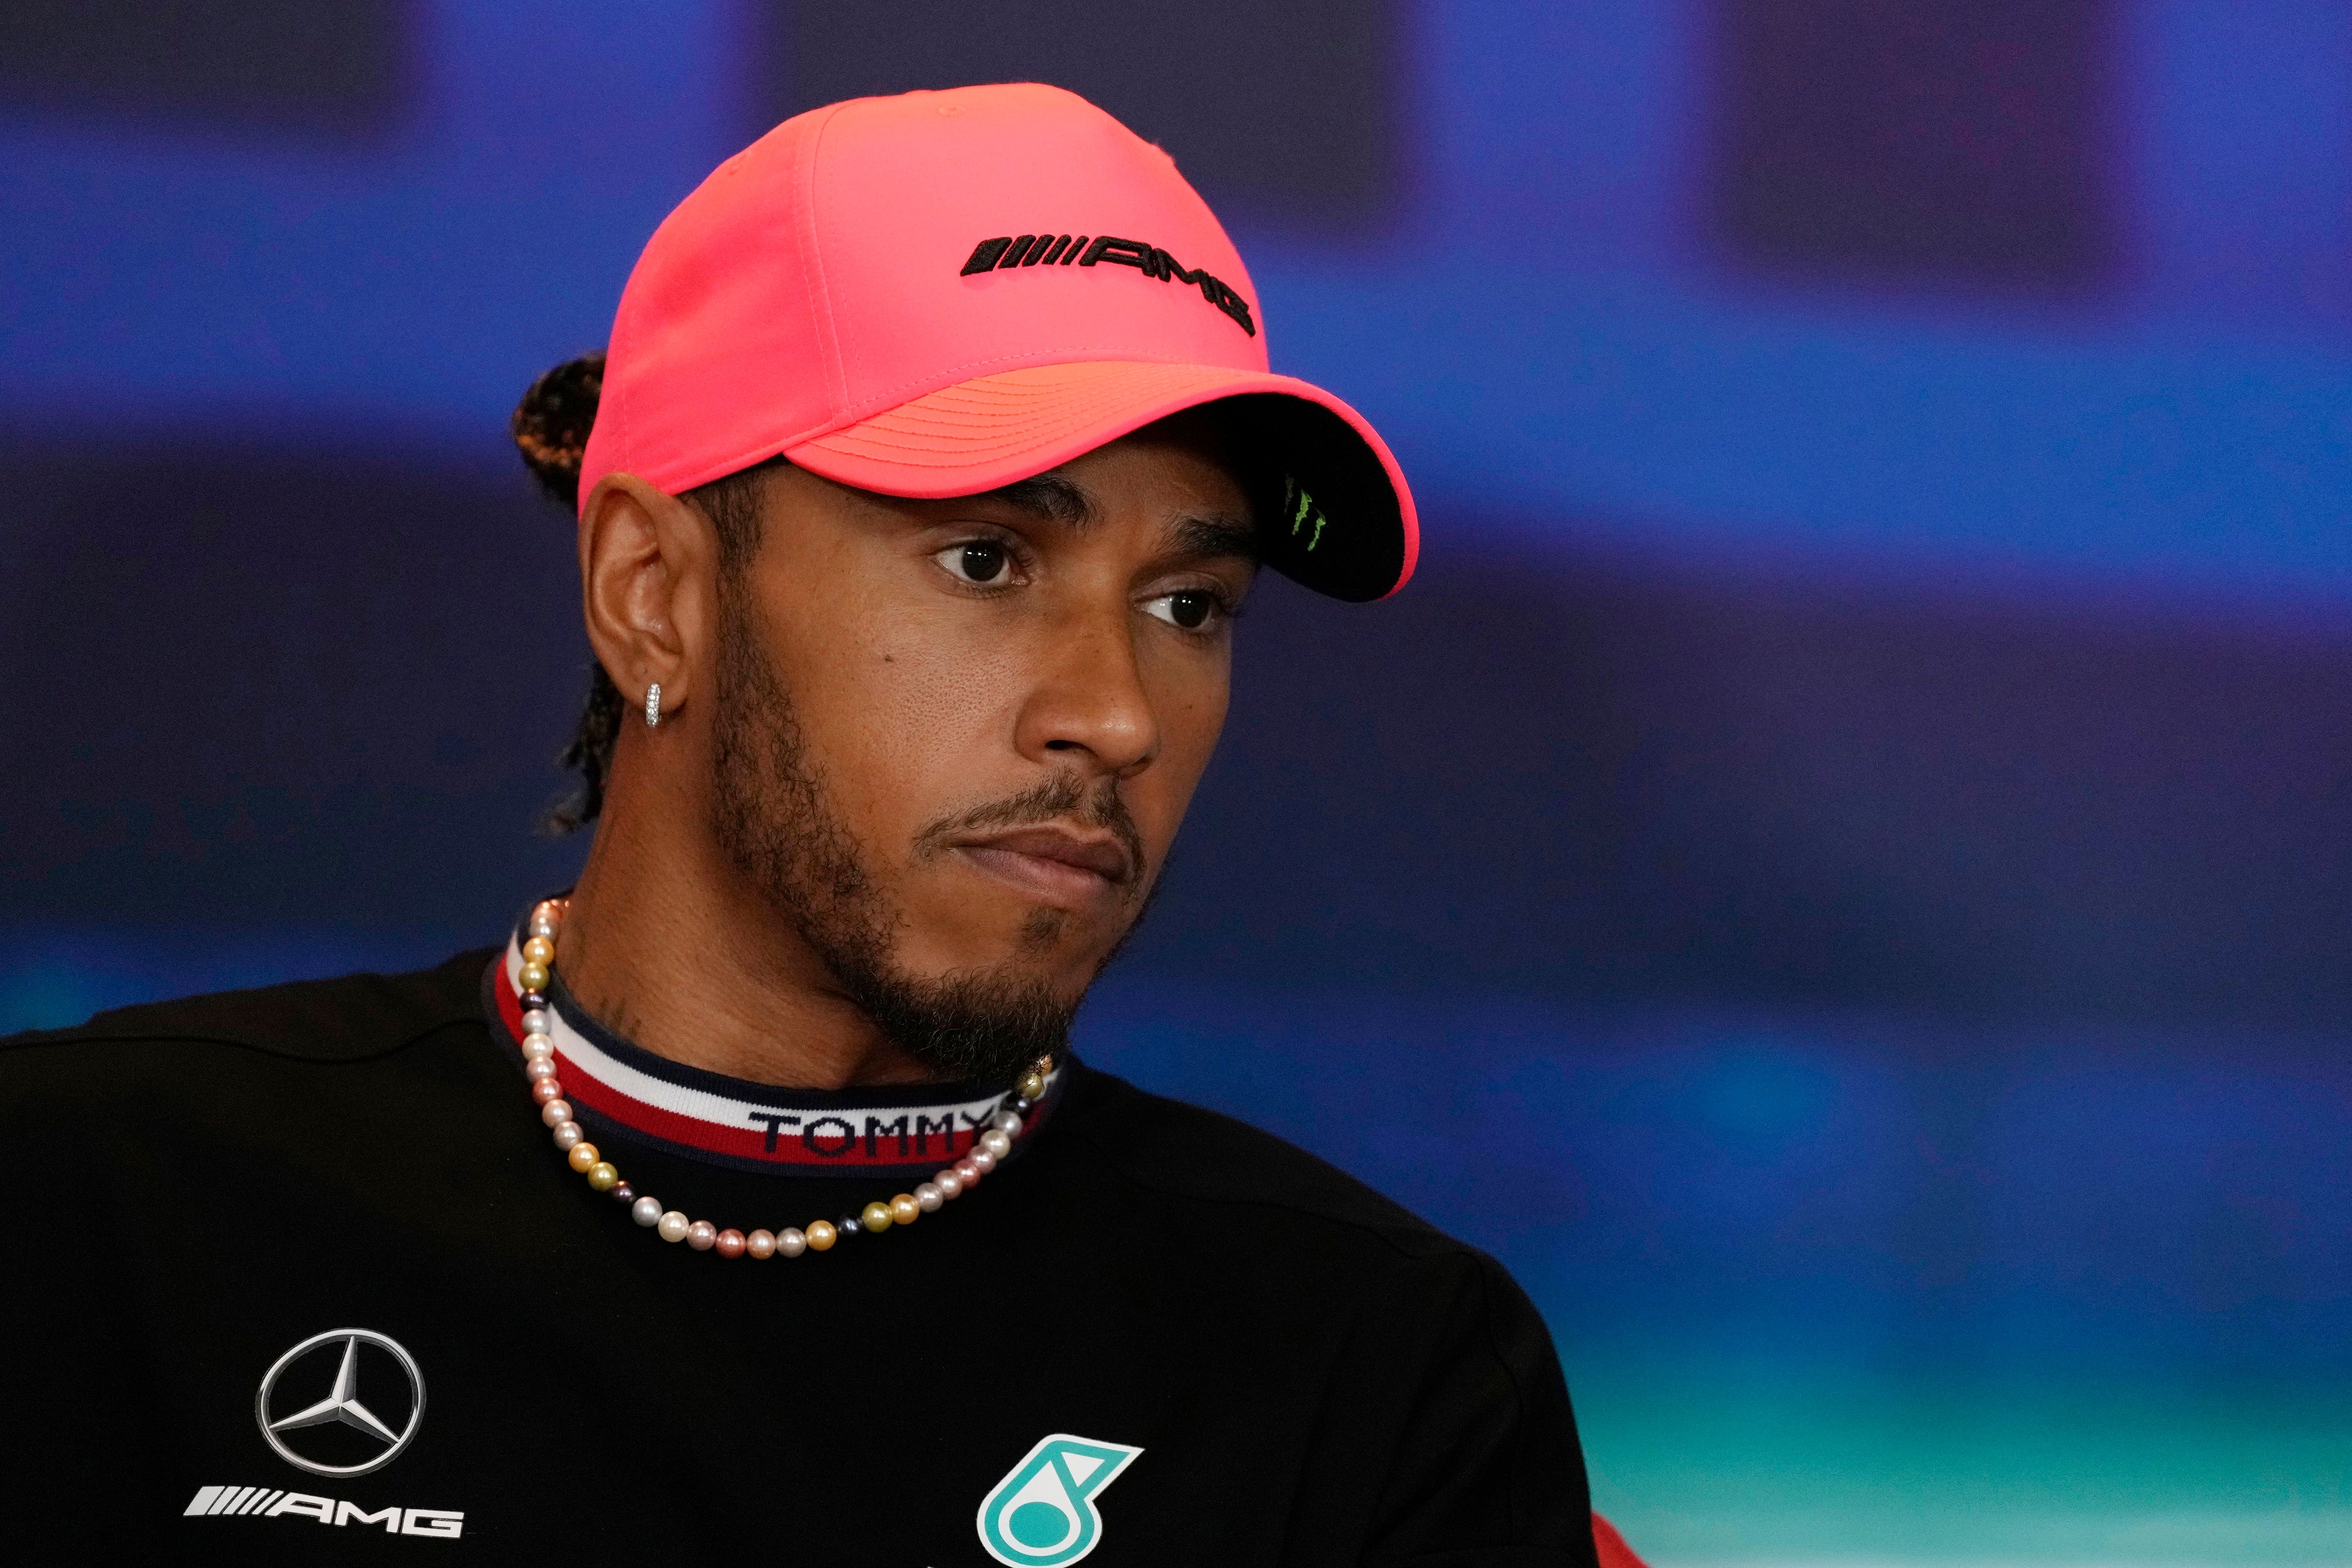 Lewis Hamilton glad poor F1 season is 'over and done with' after Abu Dhabi  woes